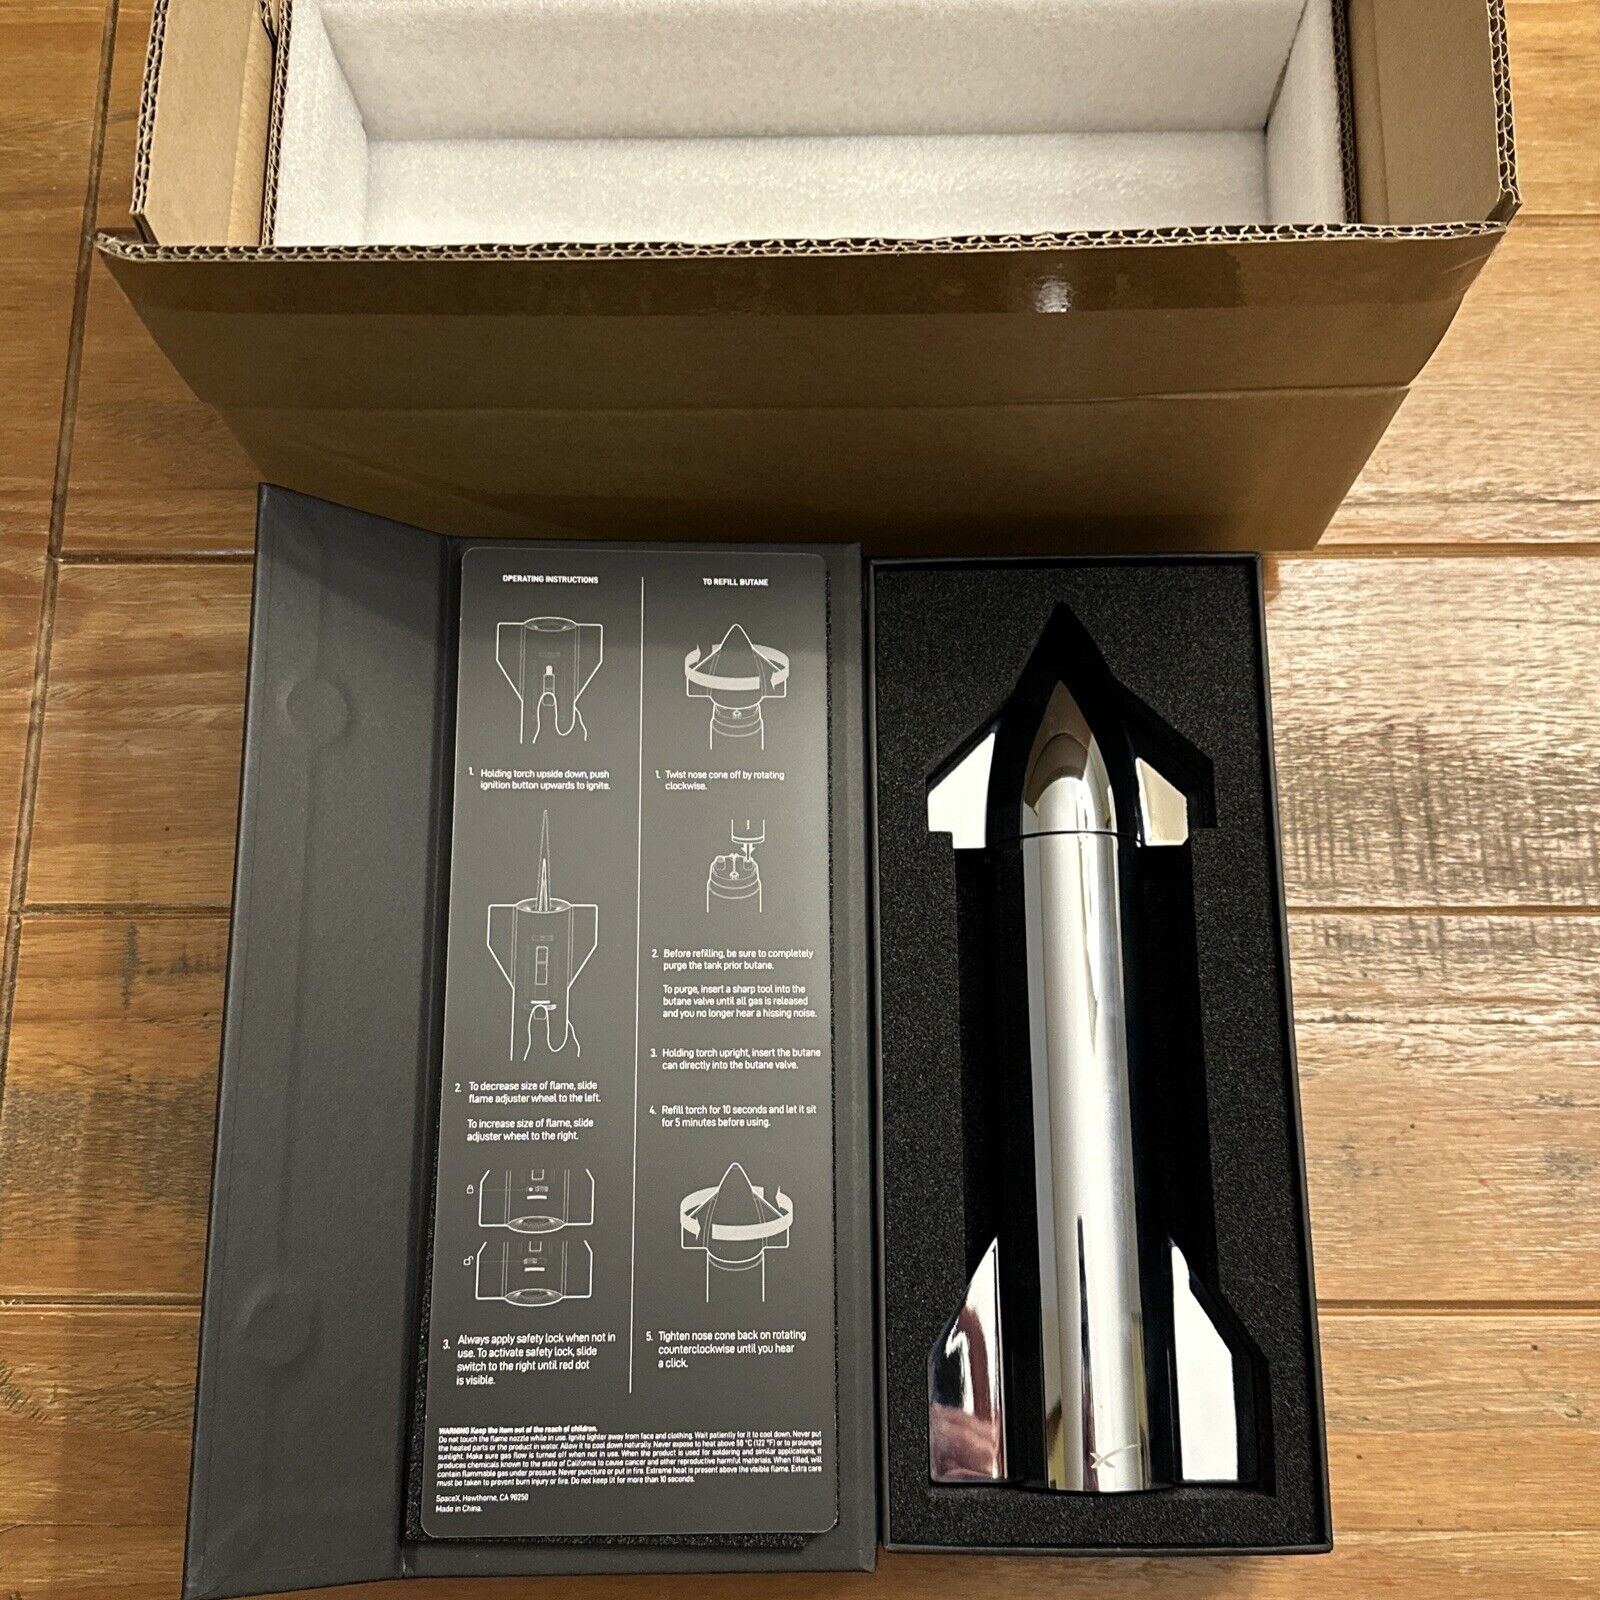 TESLA SPACE X STARSHIP TORCH Brand New In Box Limited Edition Sold Out VHTF NEW